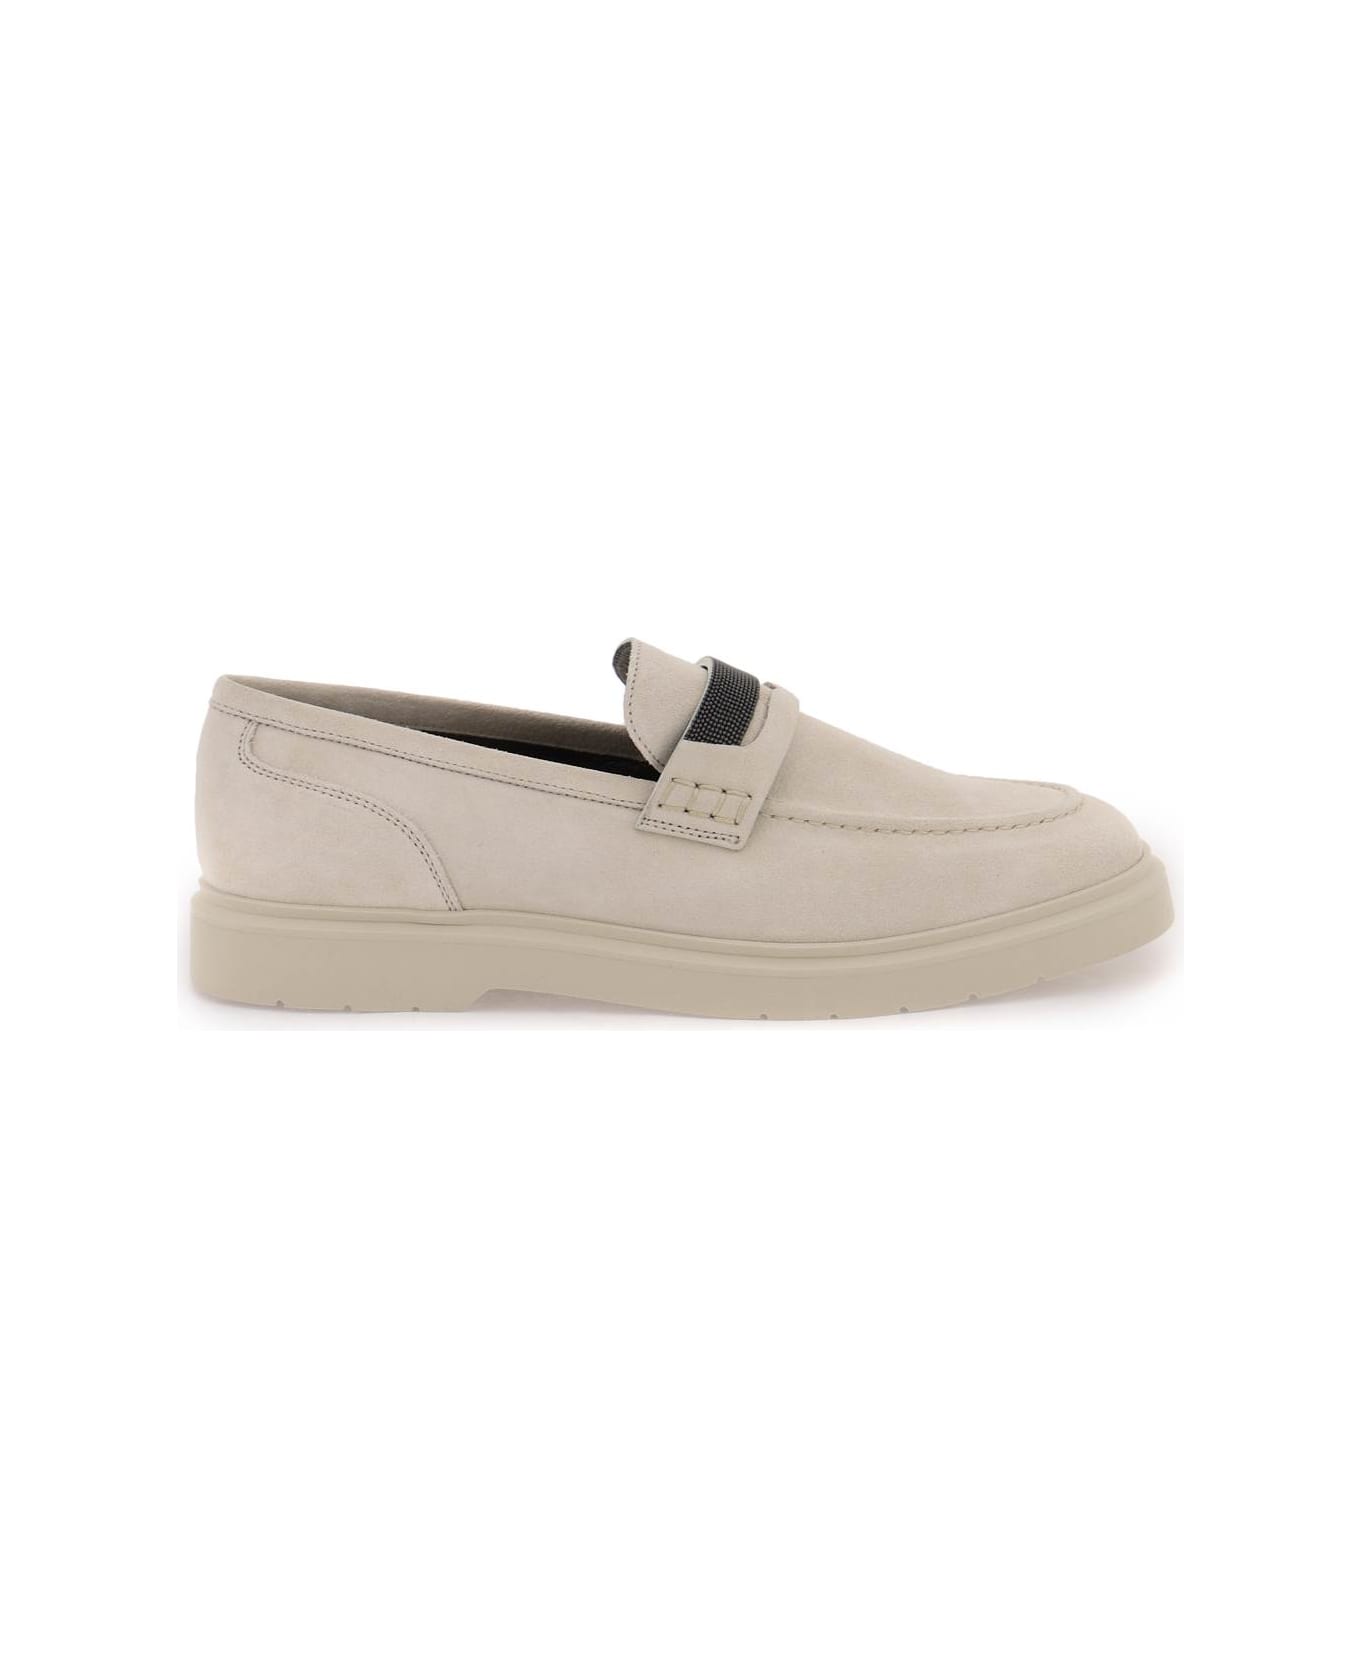 Brunello Cucinelli Suede Penny Loafer With Jewellery - Beige フラットシューズ